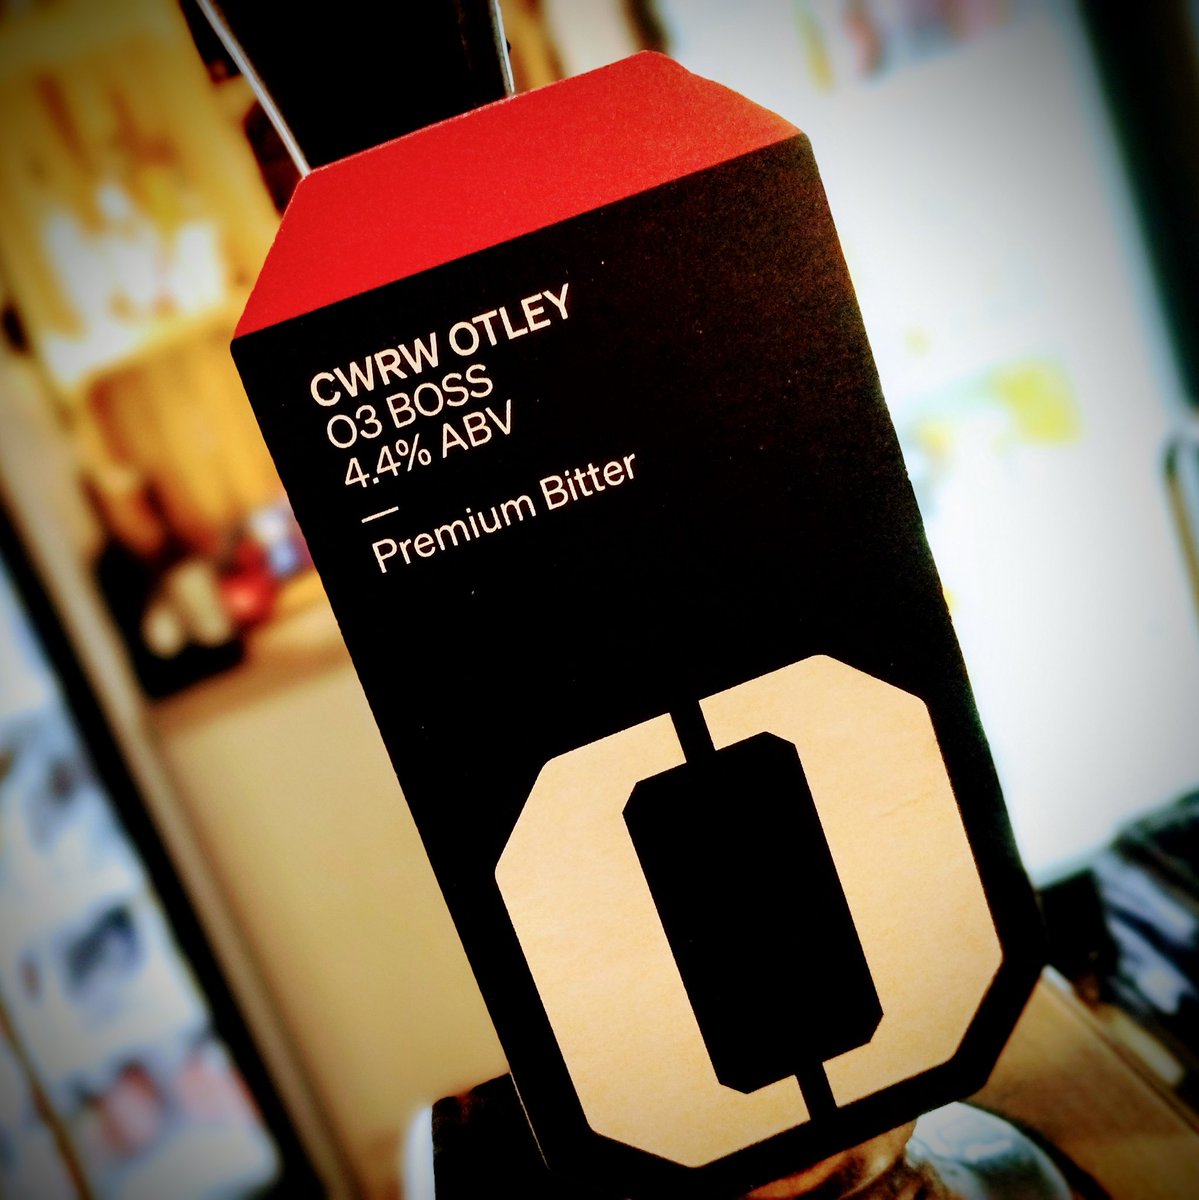 It's not often you get to talk about a brewery coming back from the dead these days, so it's great to have a cask from the renewed, Pontypridd-based Otley. Having disappeared quietly in 2018, they have recently started brewing again. Open at 12noon 👍 #colwynbay #alehouse #pub